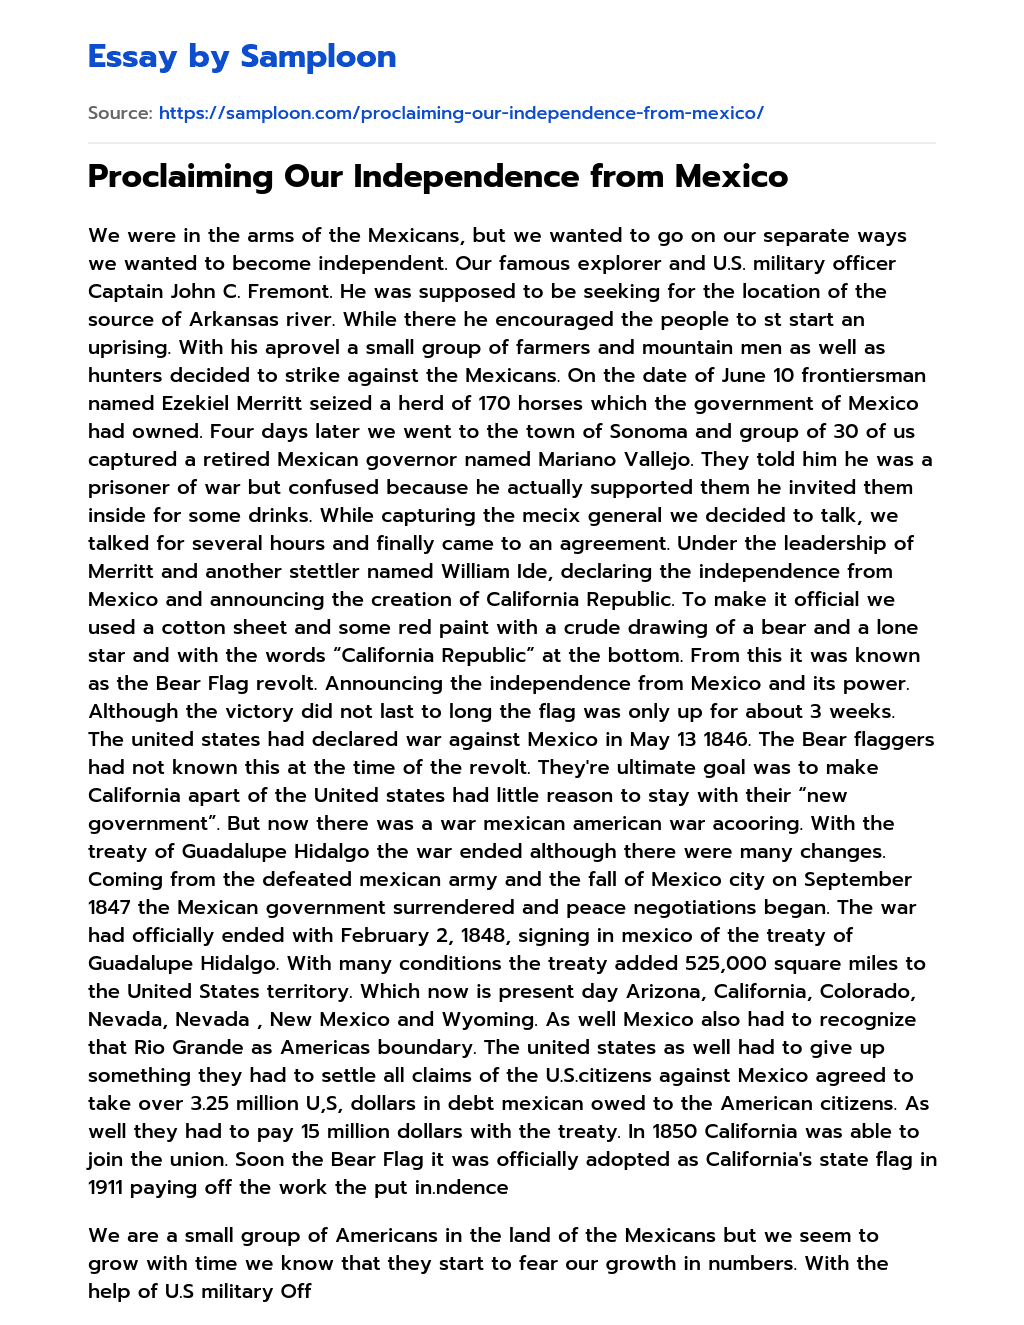 Proclaiming Our Independence from Mexico essay